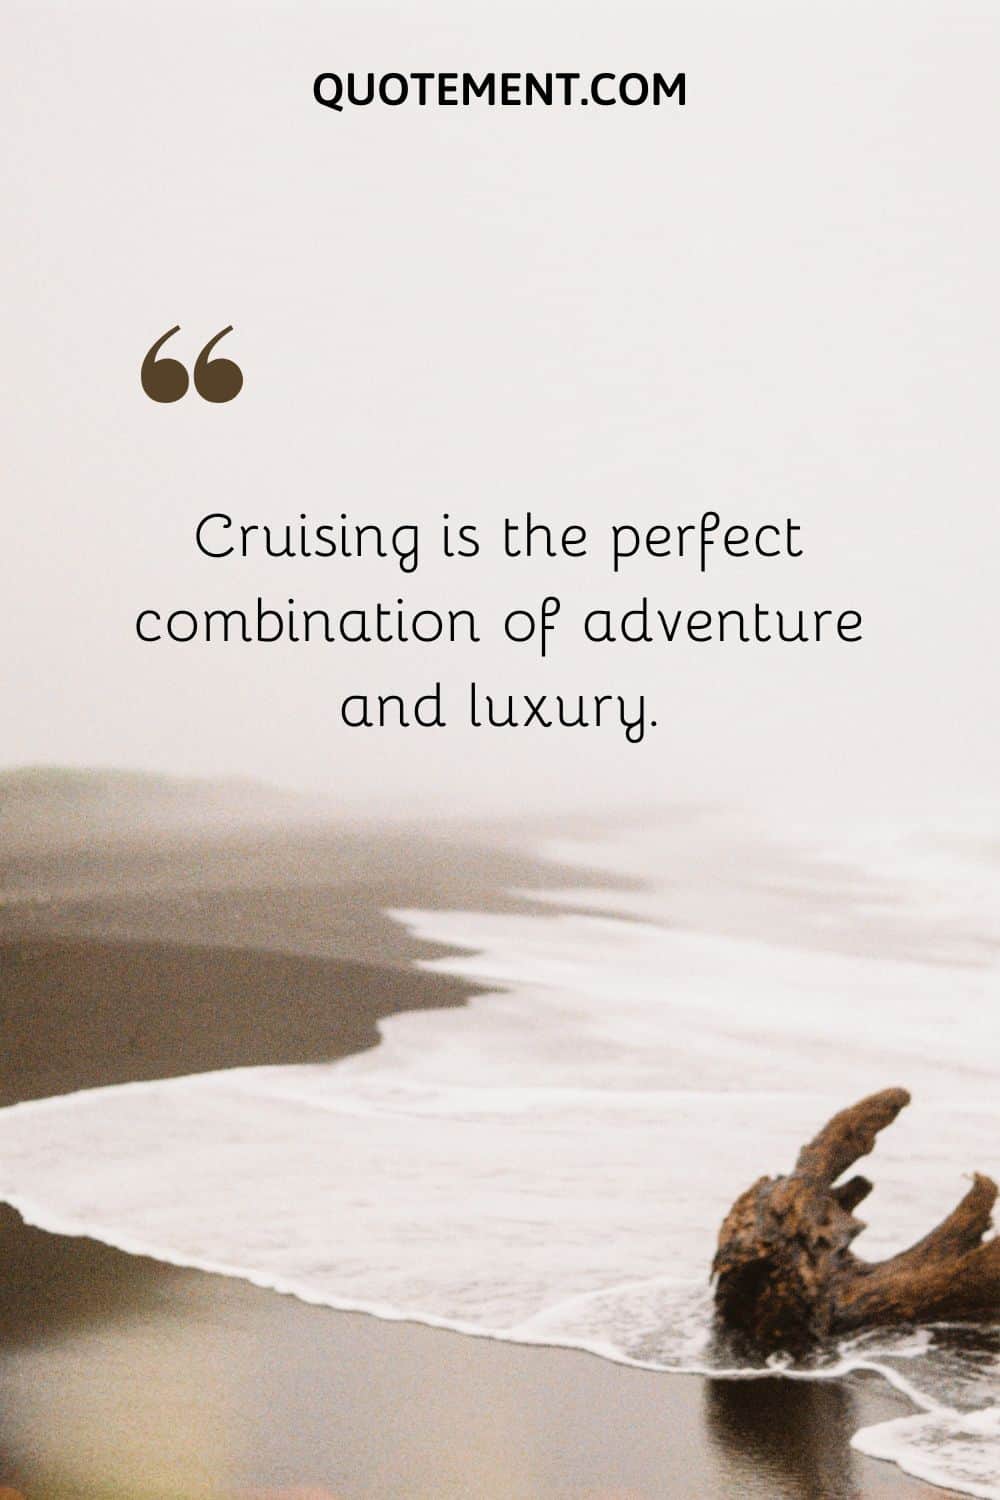 Cruising is the perfect combination of adventure and luxury.